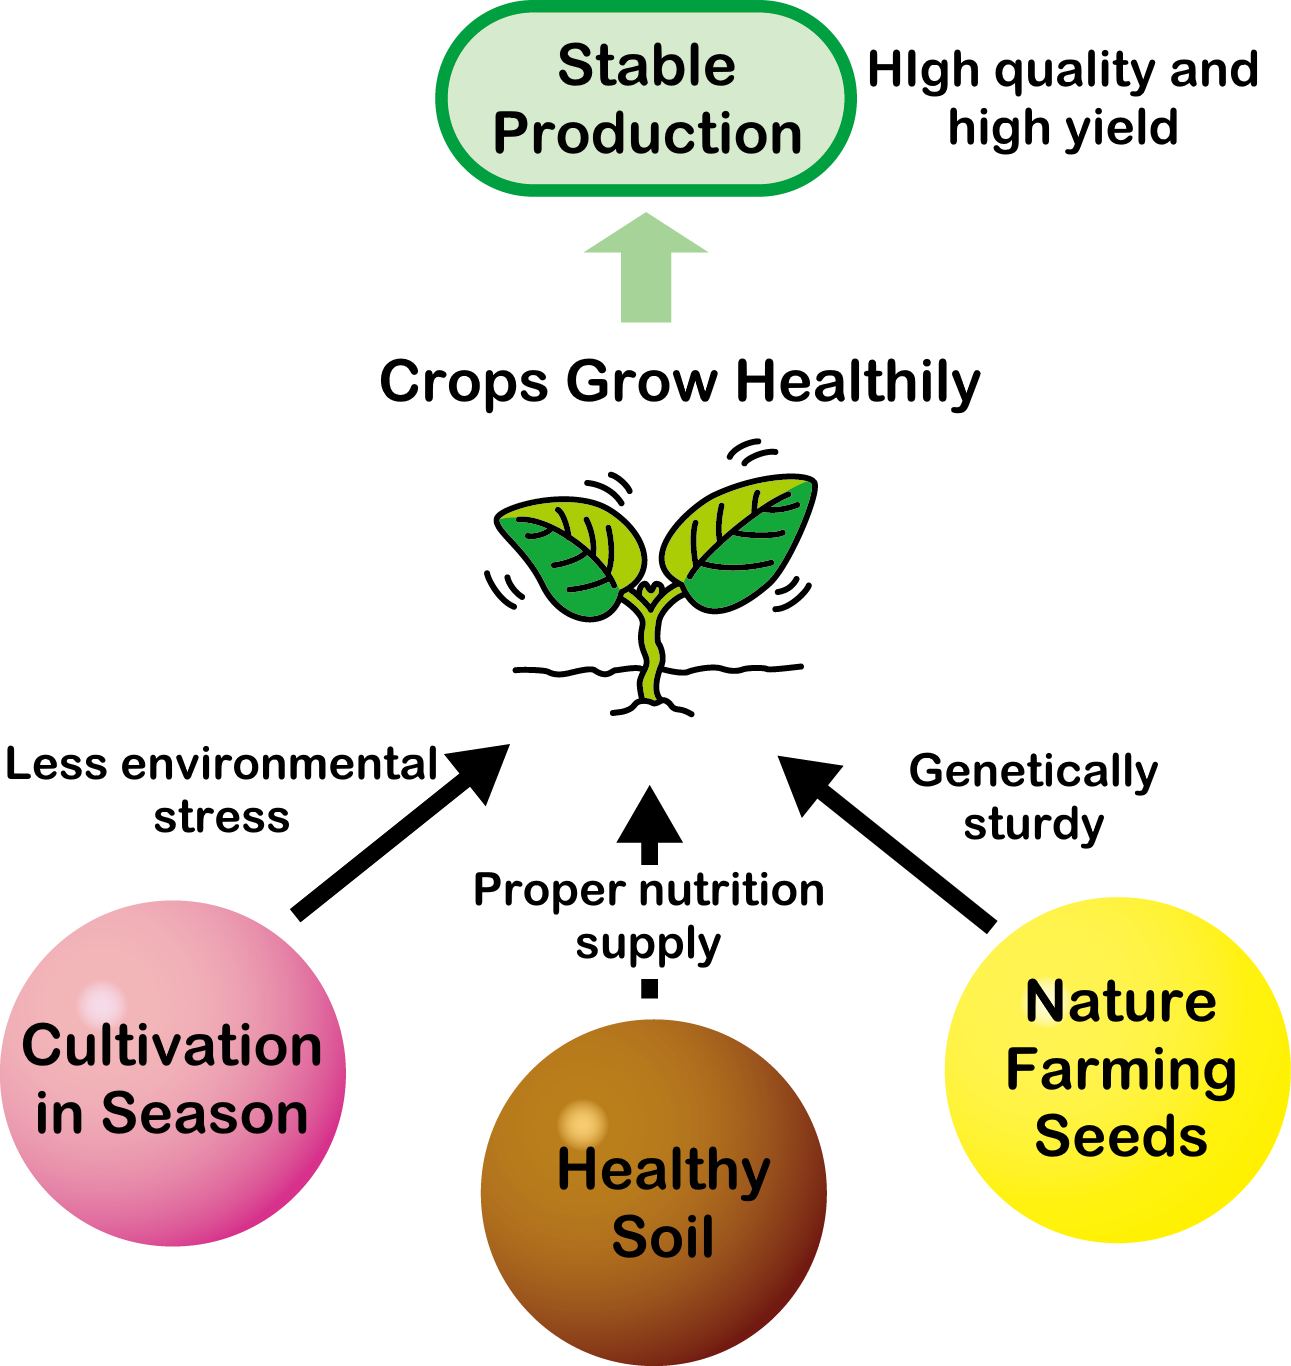 Keys to stable crop production